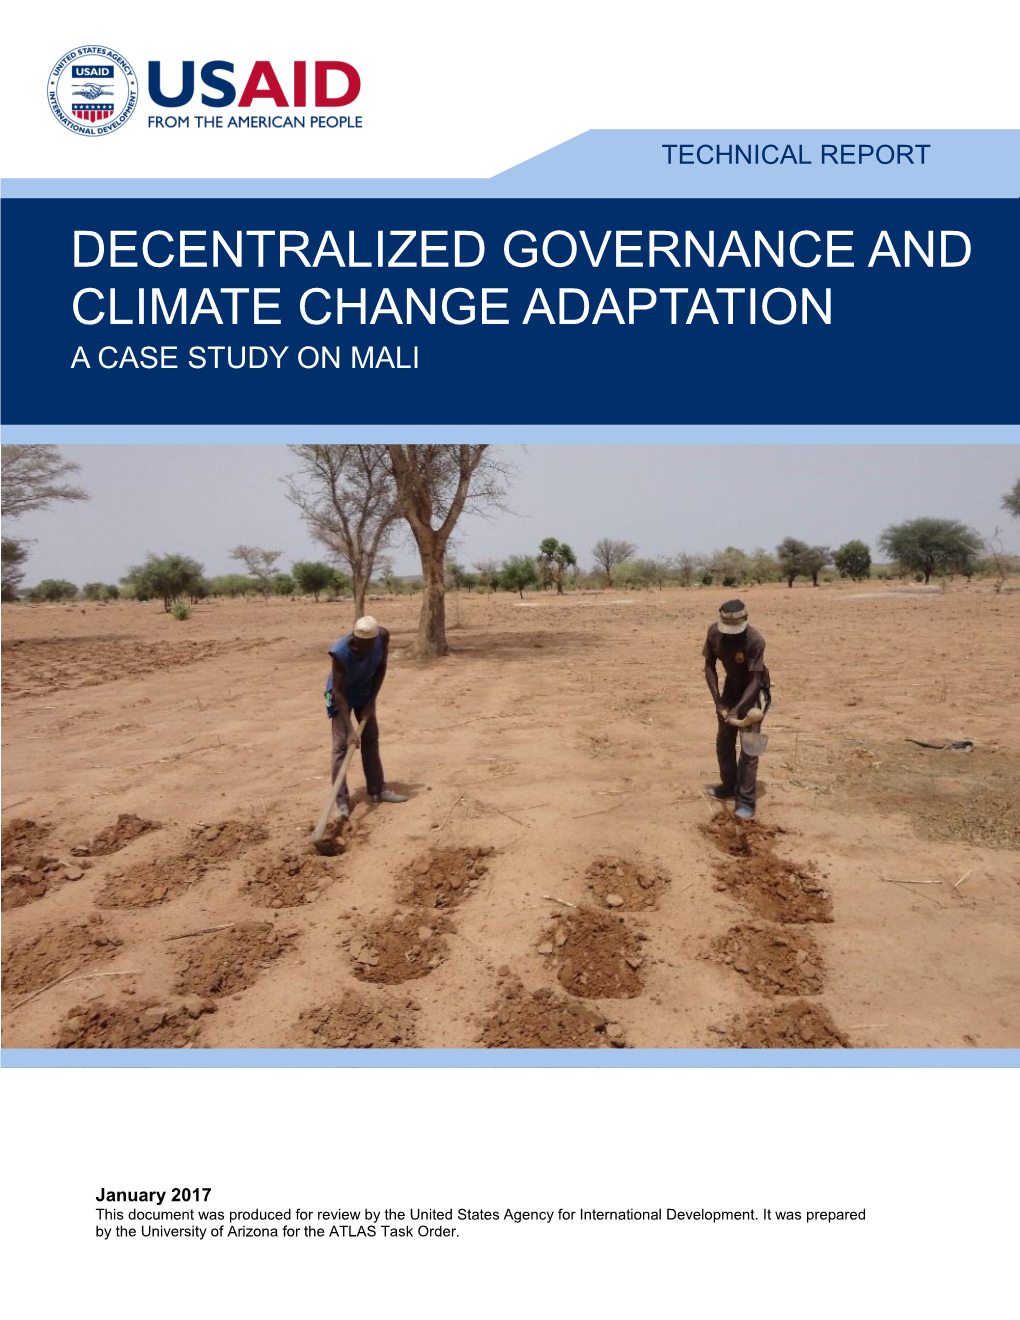 Decentralized Governance and Climate Change Adaptation